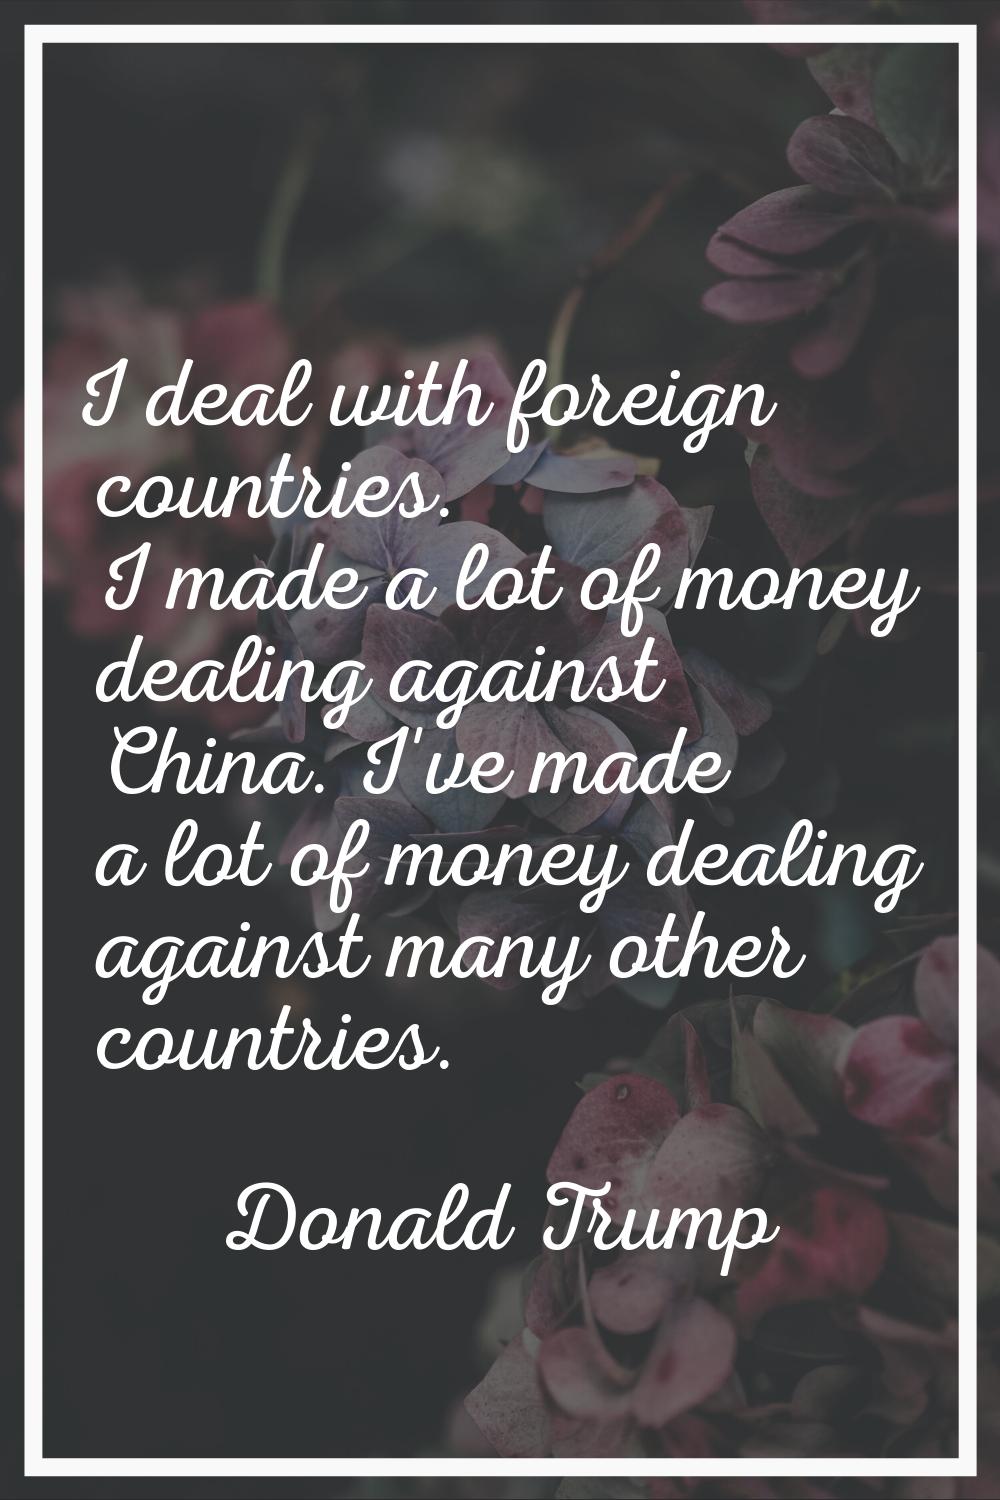 I deal with foreign countries. I made a lot of money dealing against China. I've made a lot of mone